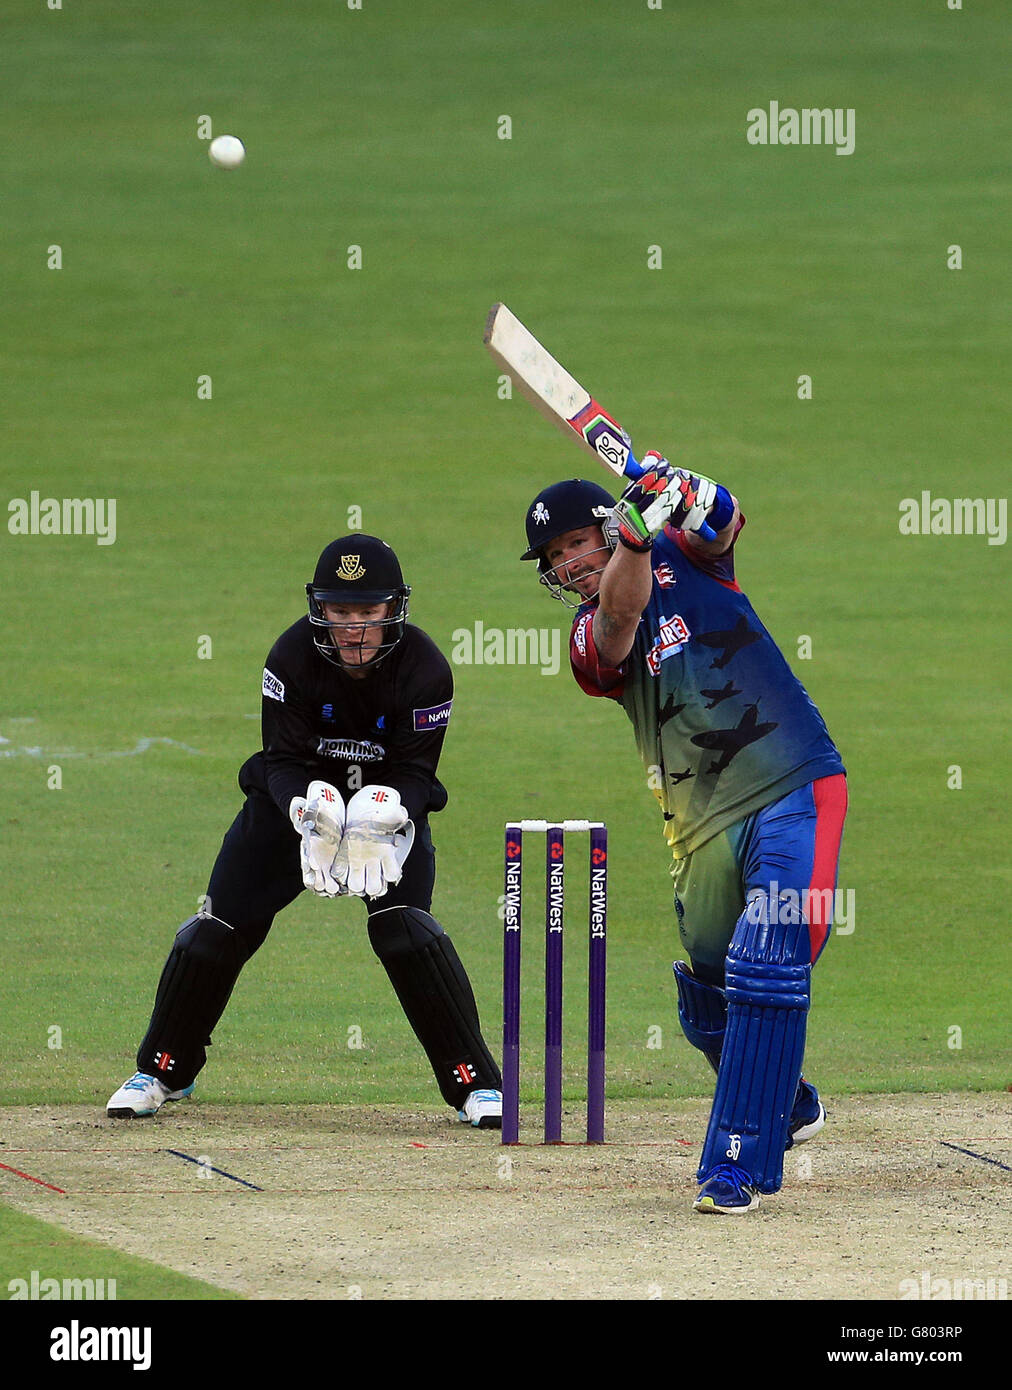 Cricket - Natwest T20 Blast - Kent v Sussex - St Lawrence Ground. Kent's Darren Stevens plays a shot watched by Sussex's Ben Brown during the Natwest T20 Blast match at the St Lawrence Ground, Canterbury. Stock Photo